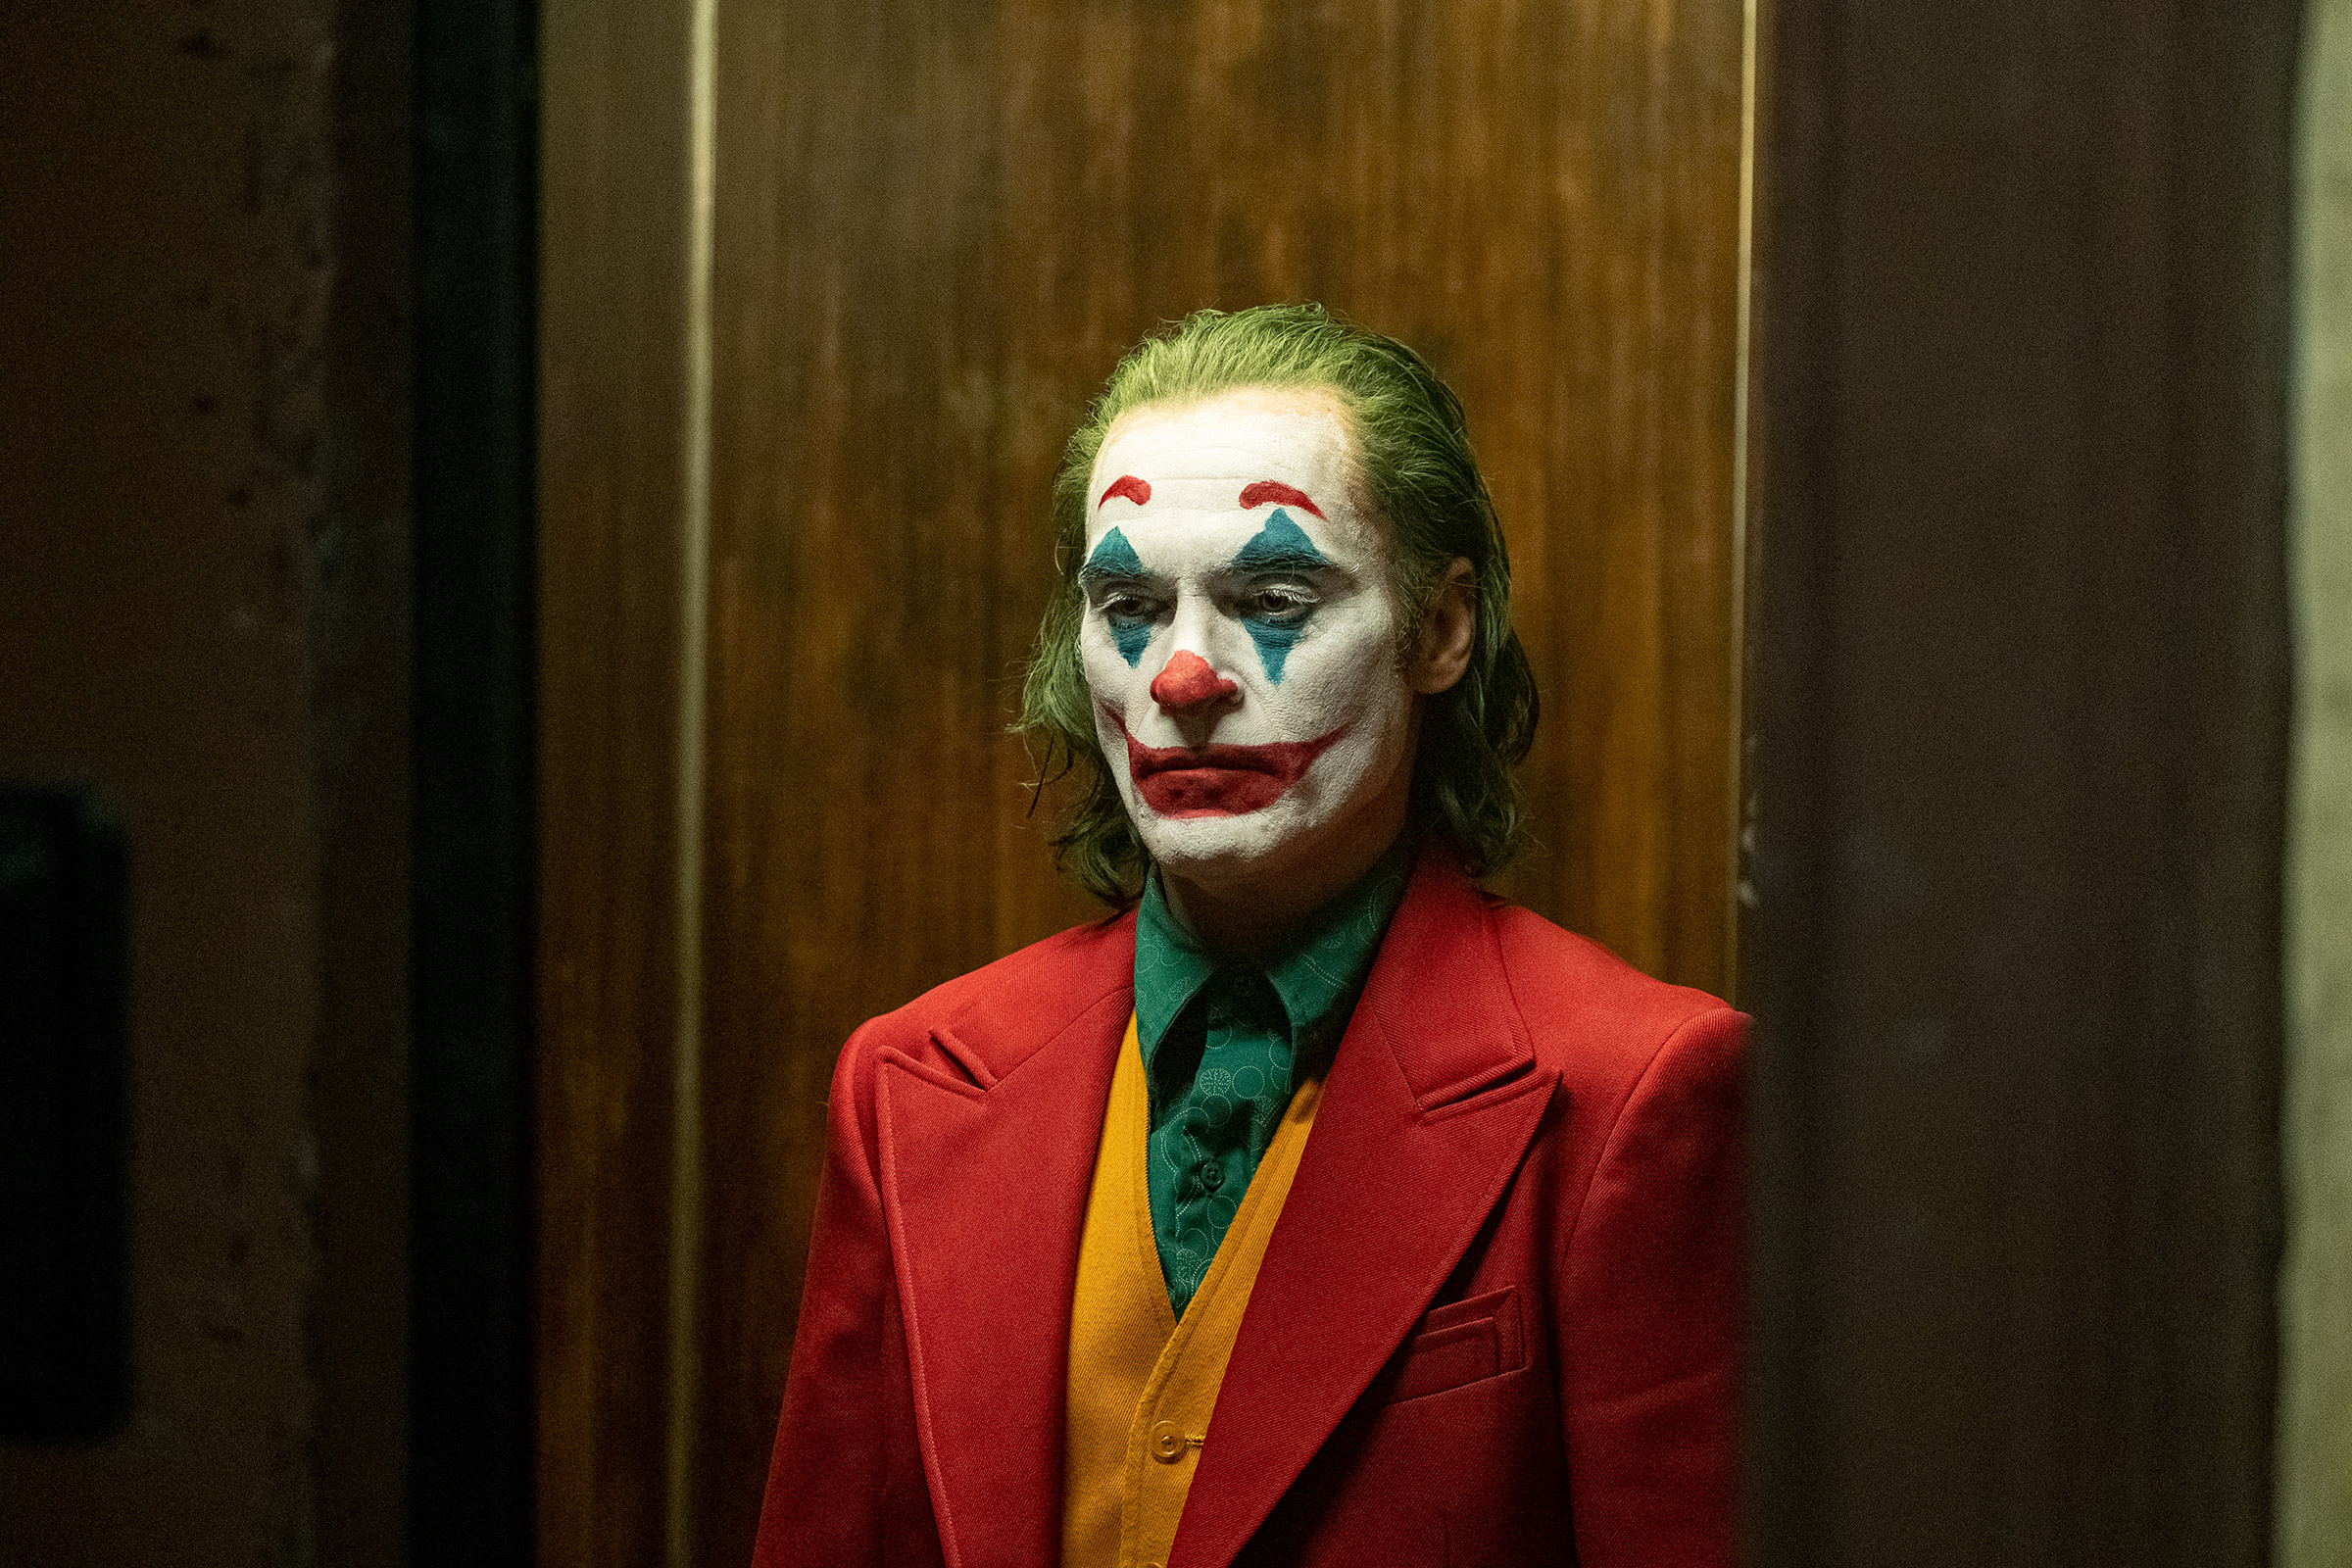 Todd Phillips’ dark take on Joker earned 11 nominations, including Actor in a Leading Role for star Joaquin Phoenix, Adapted Screenplay and Best Picture